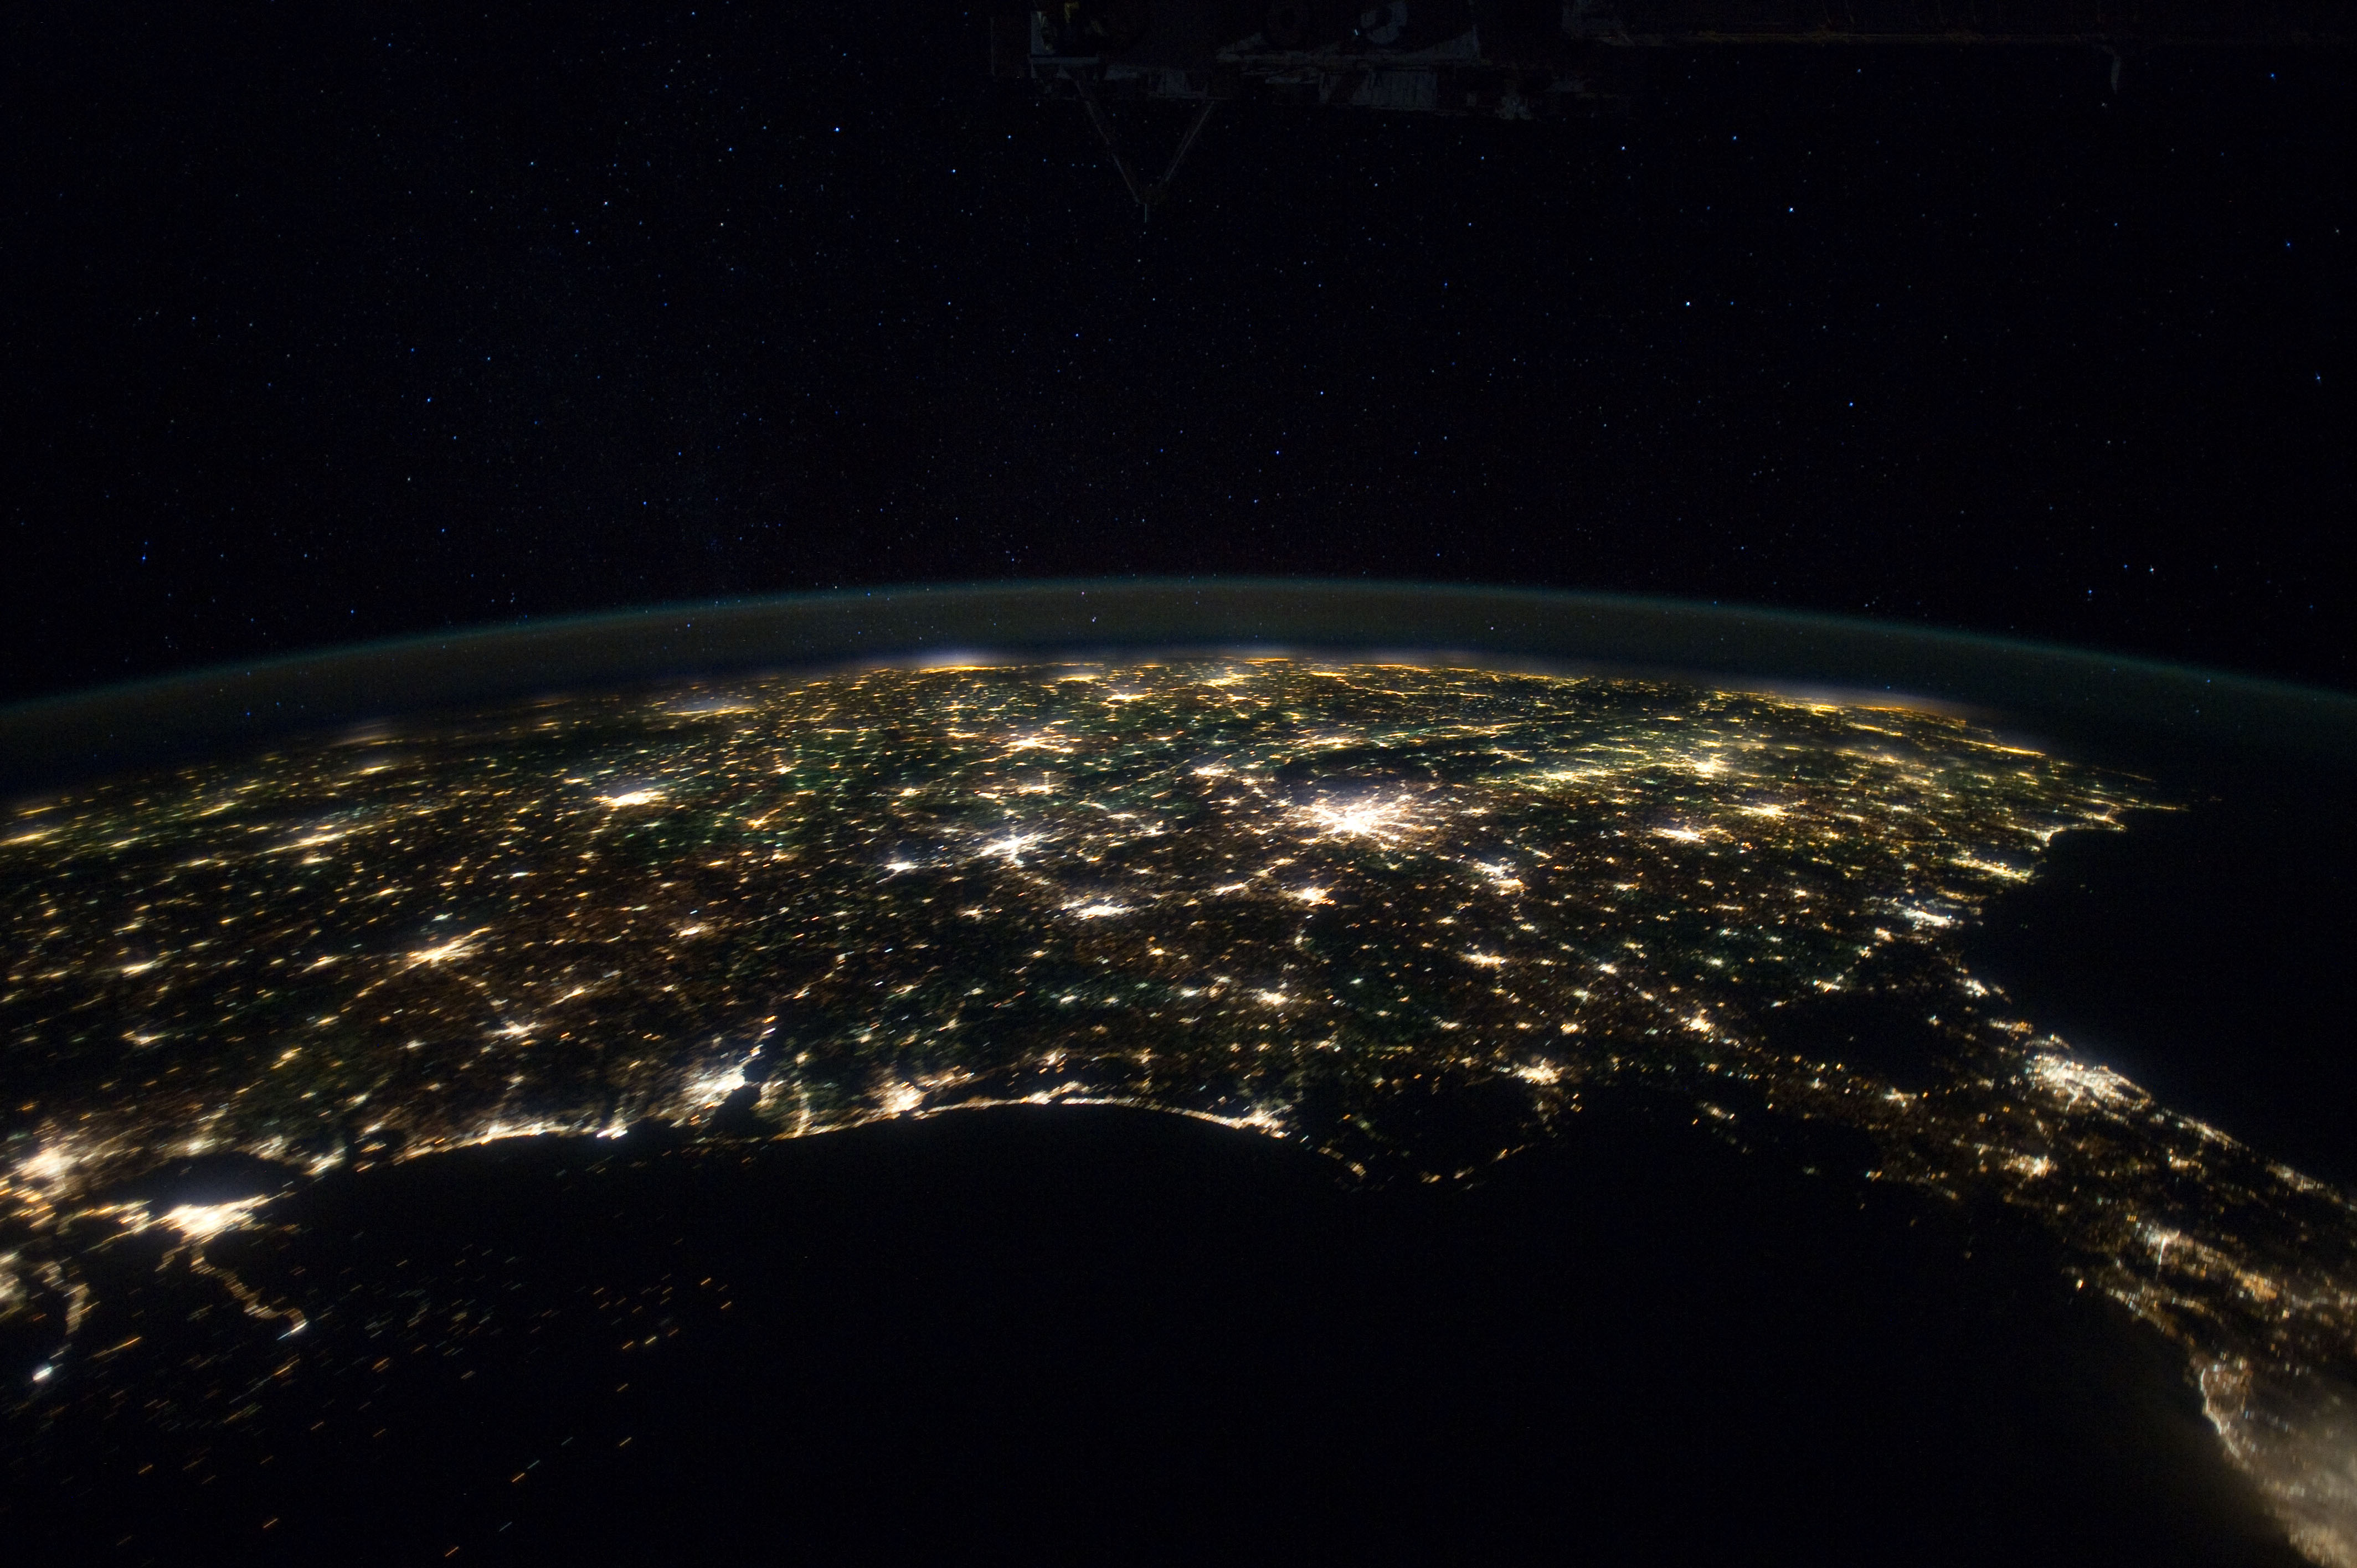 A view of the city lights of the Southeastern US from orbit.